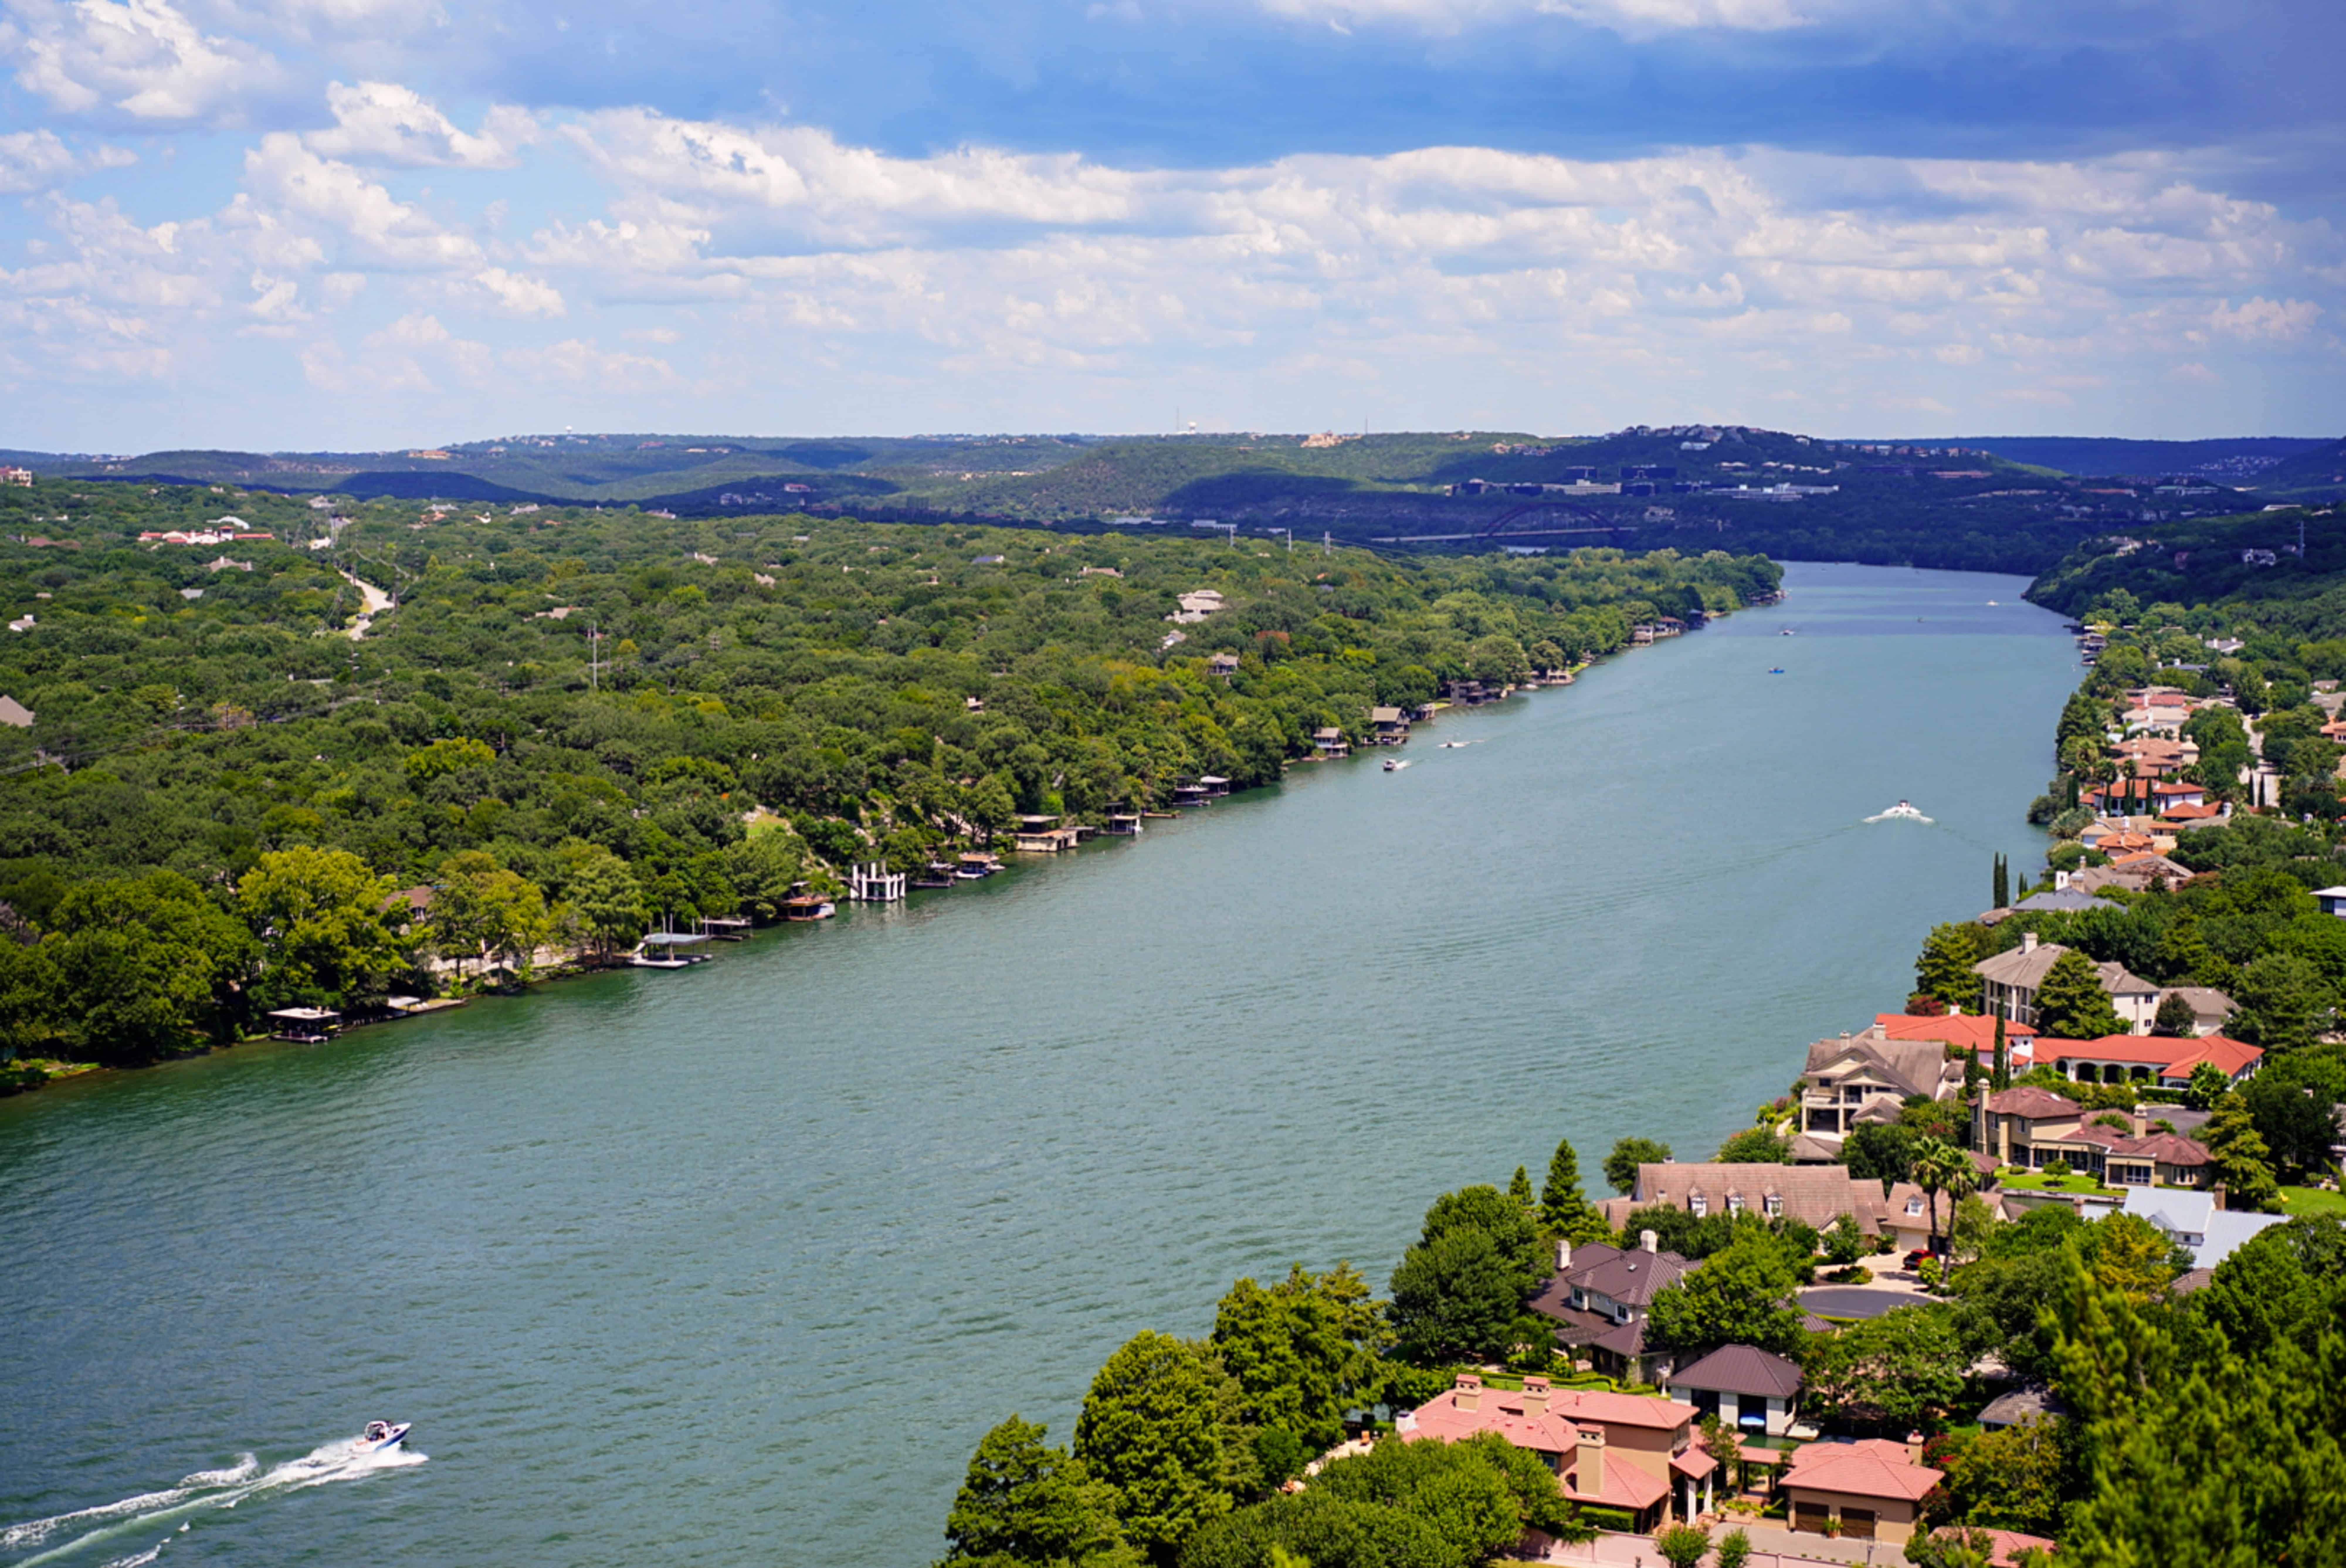 Hiking at Mount Bonnell